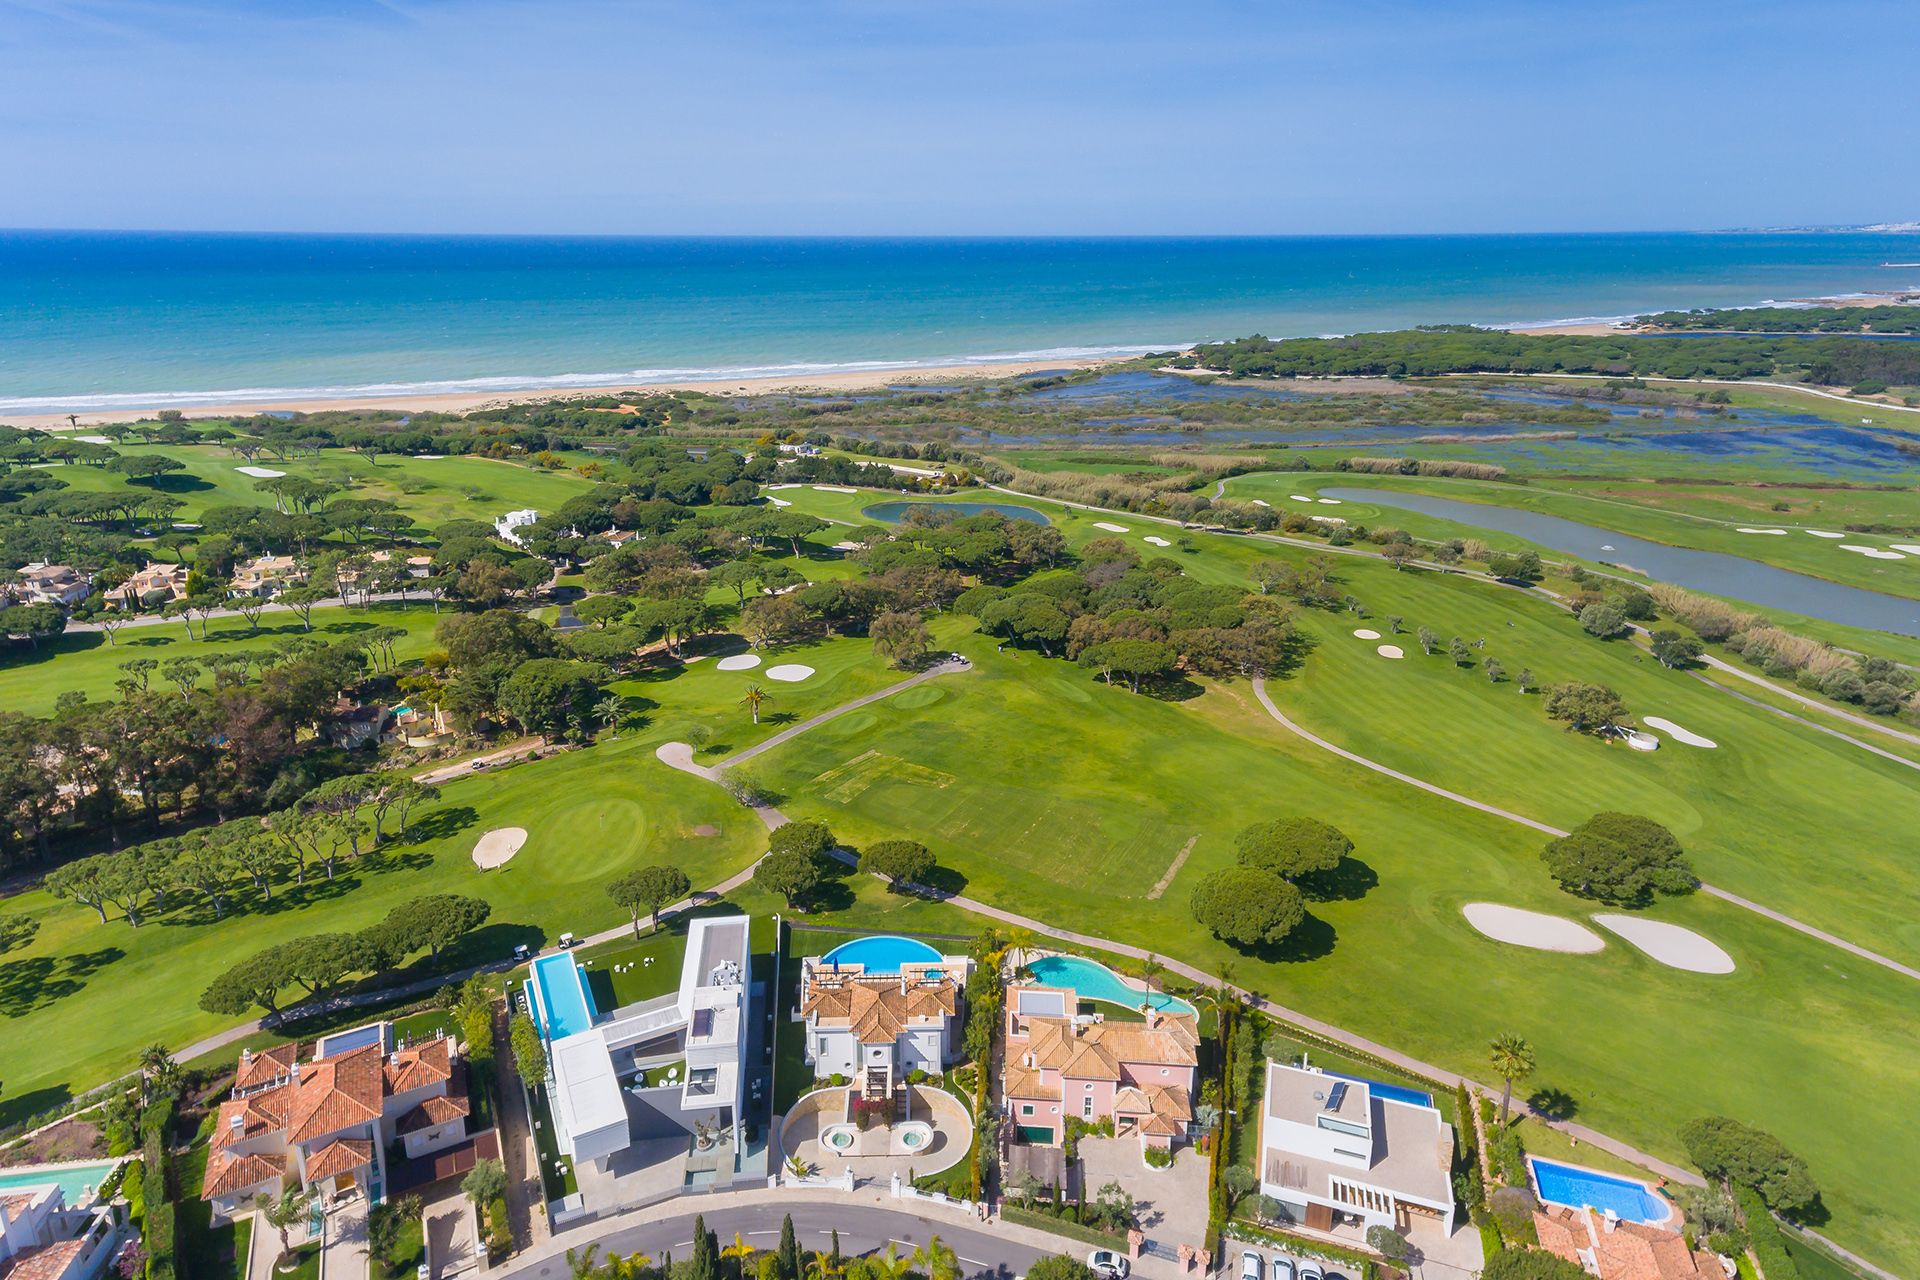 Vale do Lobo with growing trend of demand for investors and digital nomads